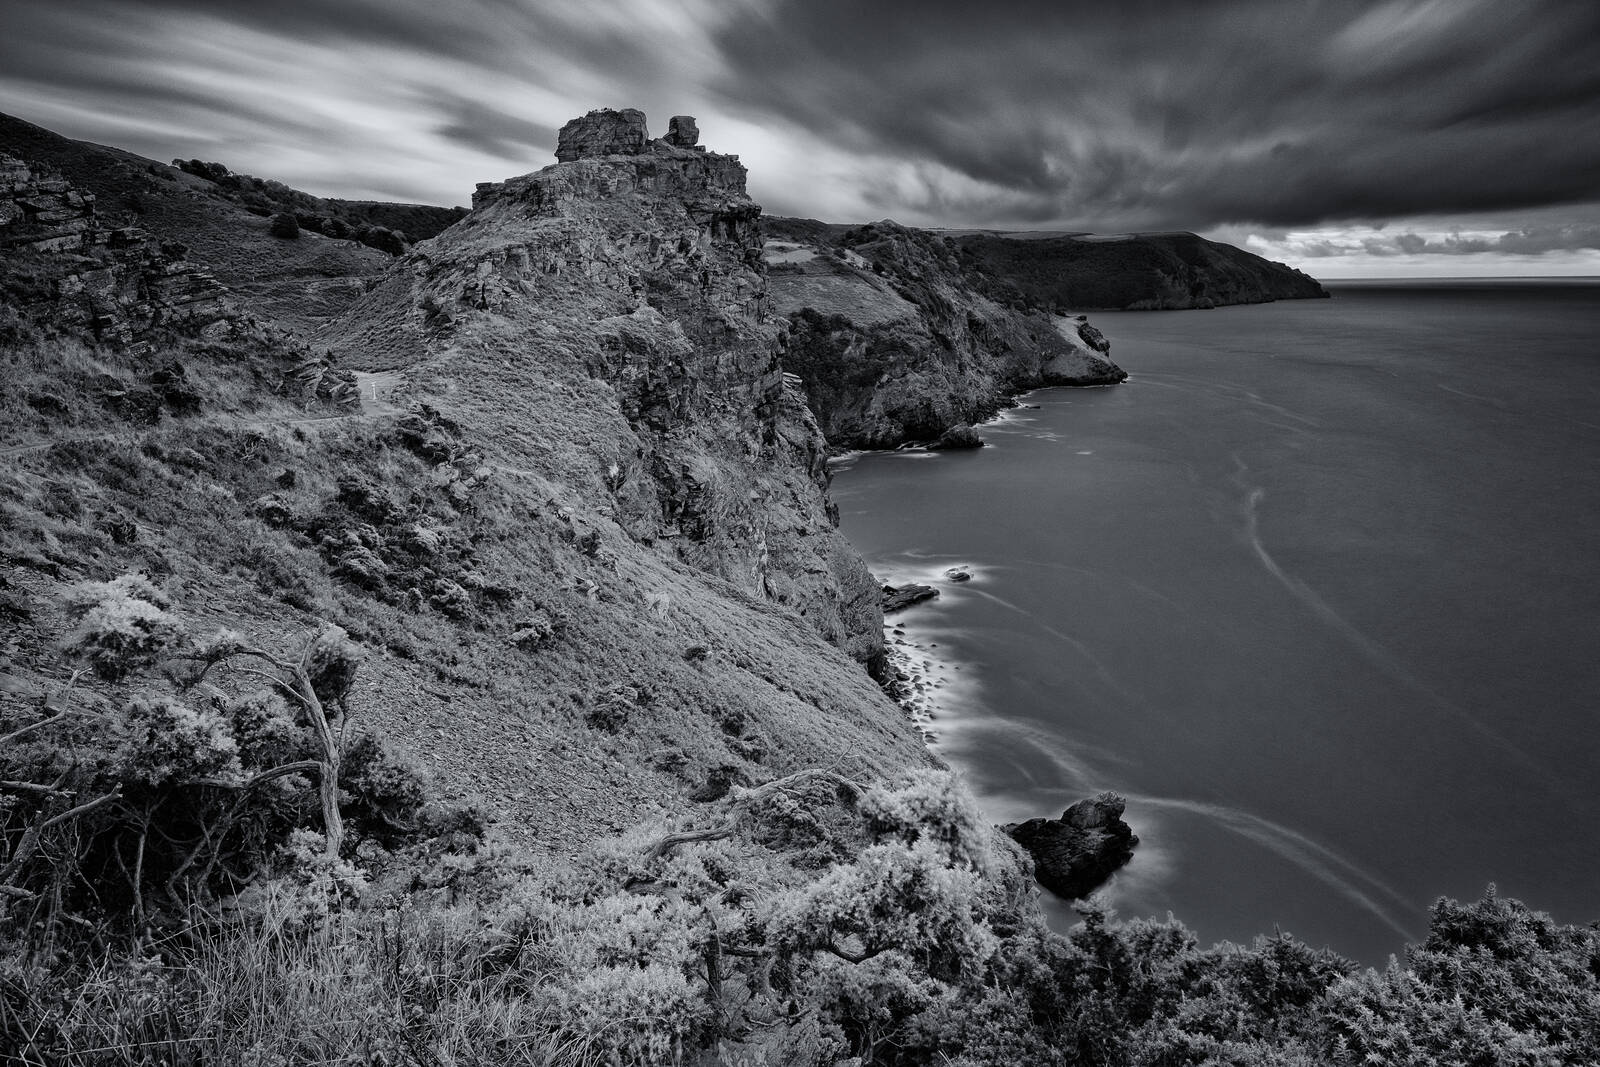 Image of Valley of Rocks by Andreas Marjoram